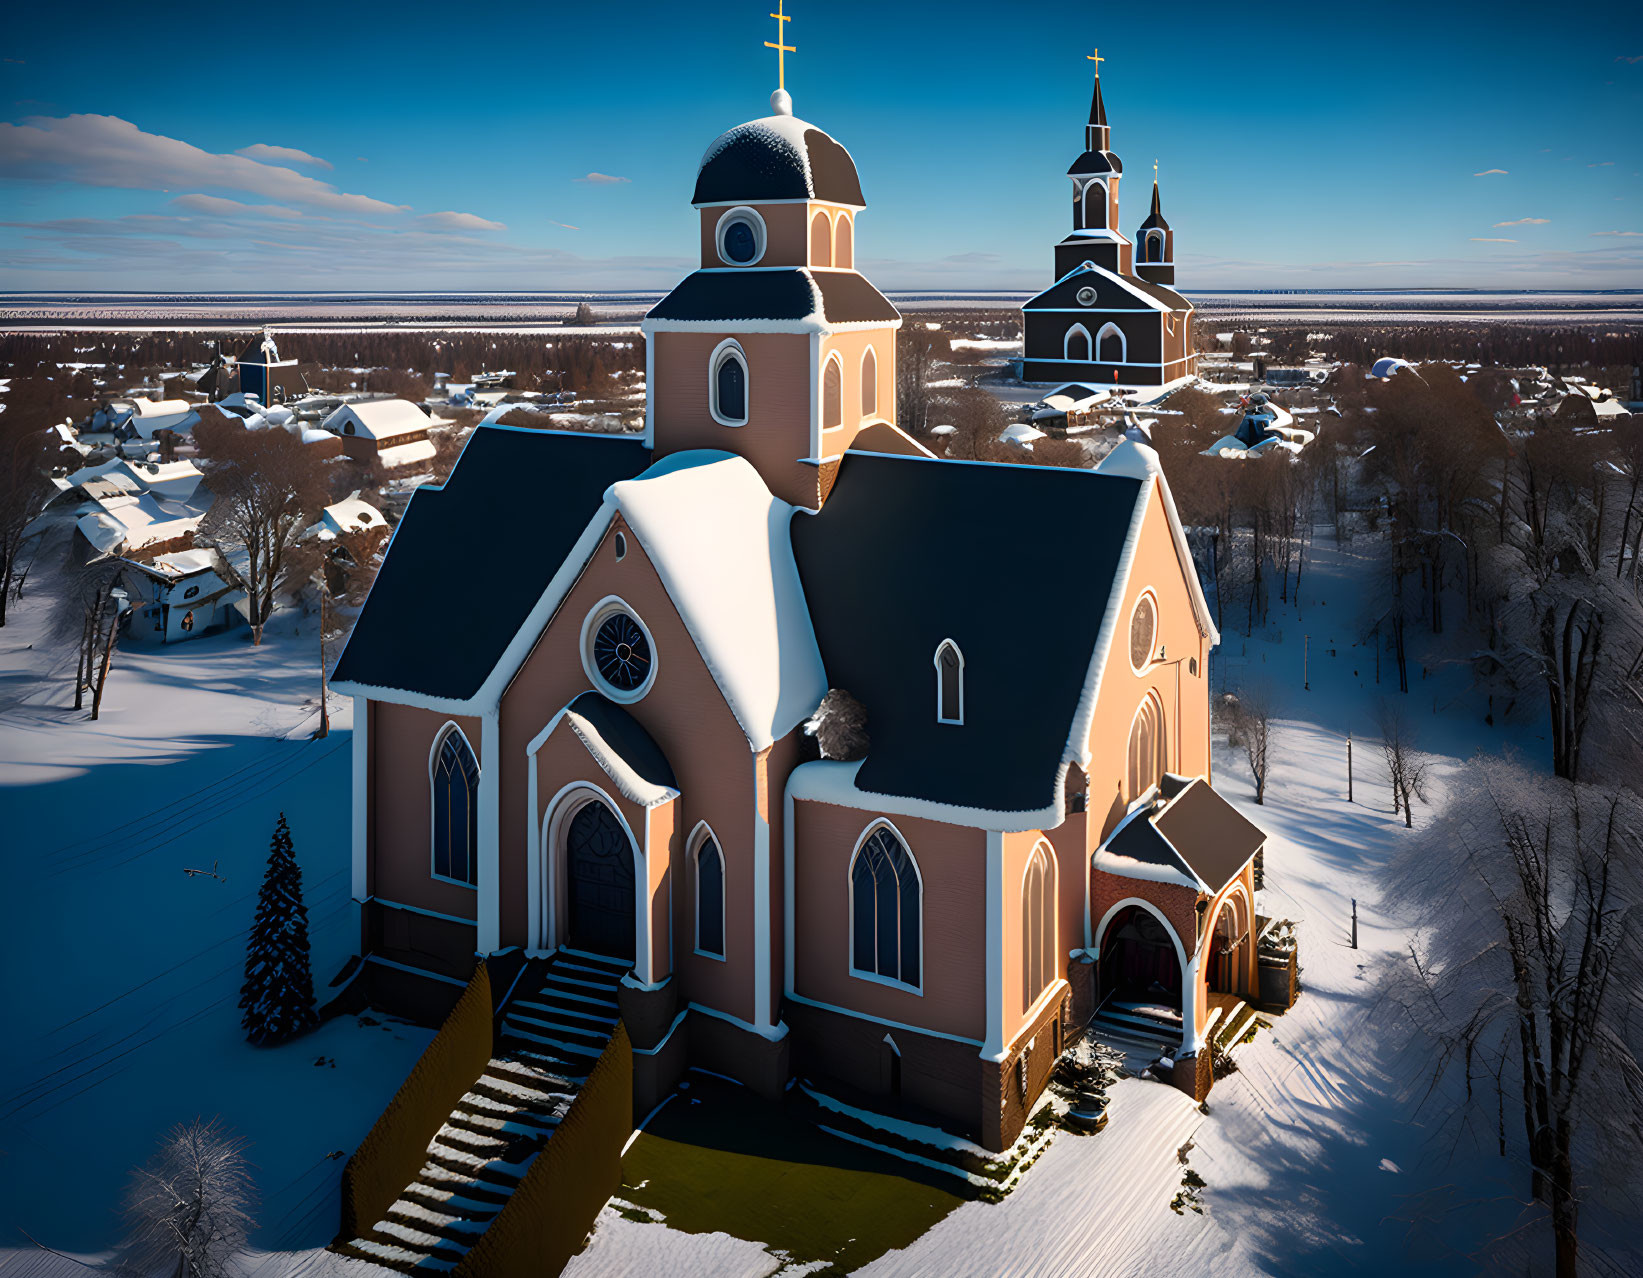 Winter village scene: snow-covered church with two steeples in clear blue sky